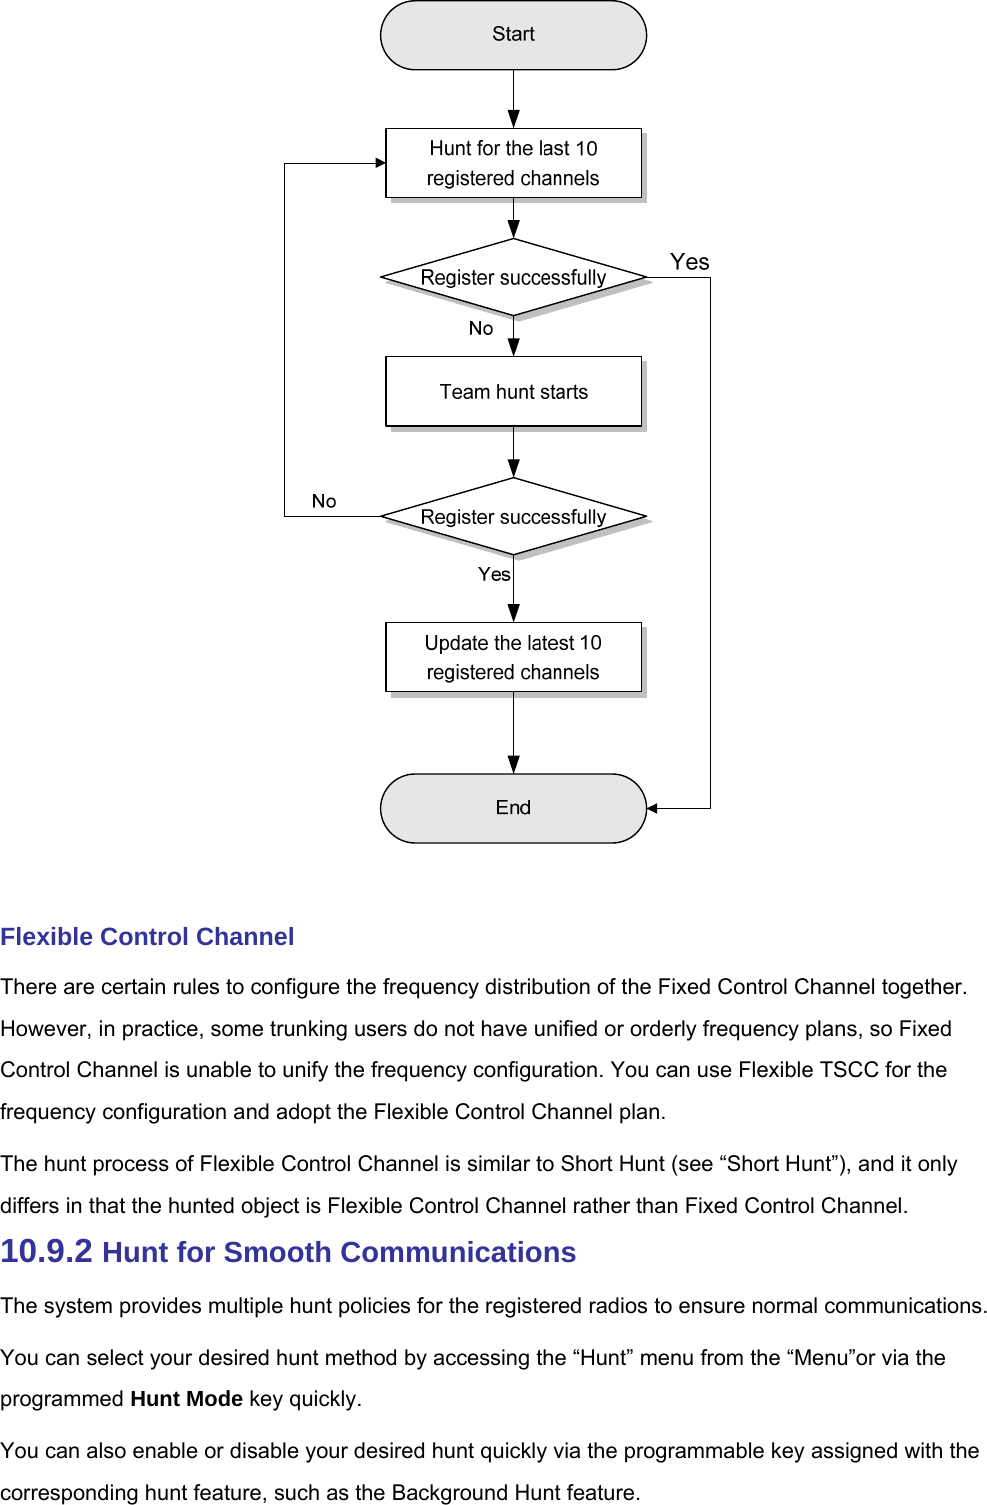    Flexible Control Channel There are certain rules to configure the frequency distribution of the Fixed Control Channel together. However, in practice, some trunking users do not have unified or orderly frequency plans, so Fixed Control Channel is unable to unify the frequency configuration. You can use Flexible TSCC for the frequency configuration and adopt the Flexible Control Channel plan.   The hunt process of Flexible Control Channel is similar to Short Hunt (see “Short Hunt”), and it only differs in that the hunted object is Flexible Control Channel rather than Fixed Control Channel.   10.9.2 Hunt for Smooth Communications The system provides multiple hunt policies for the registered radios to ensure normal communications.   You can select your desired hunt method by accessing the “Hunt” menu from the “Menu”or via the programmed Hunt Mode key quickly.   You can also enable or disable your desired hunt quickly via the programmable key assigned with the corresponding hunt feature, such as the Background Hunt feature.   